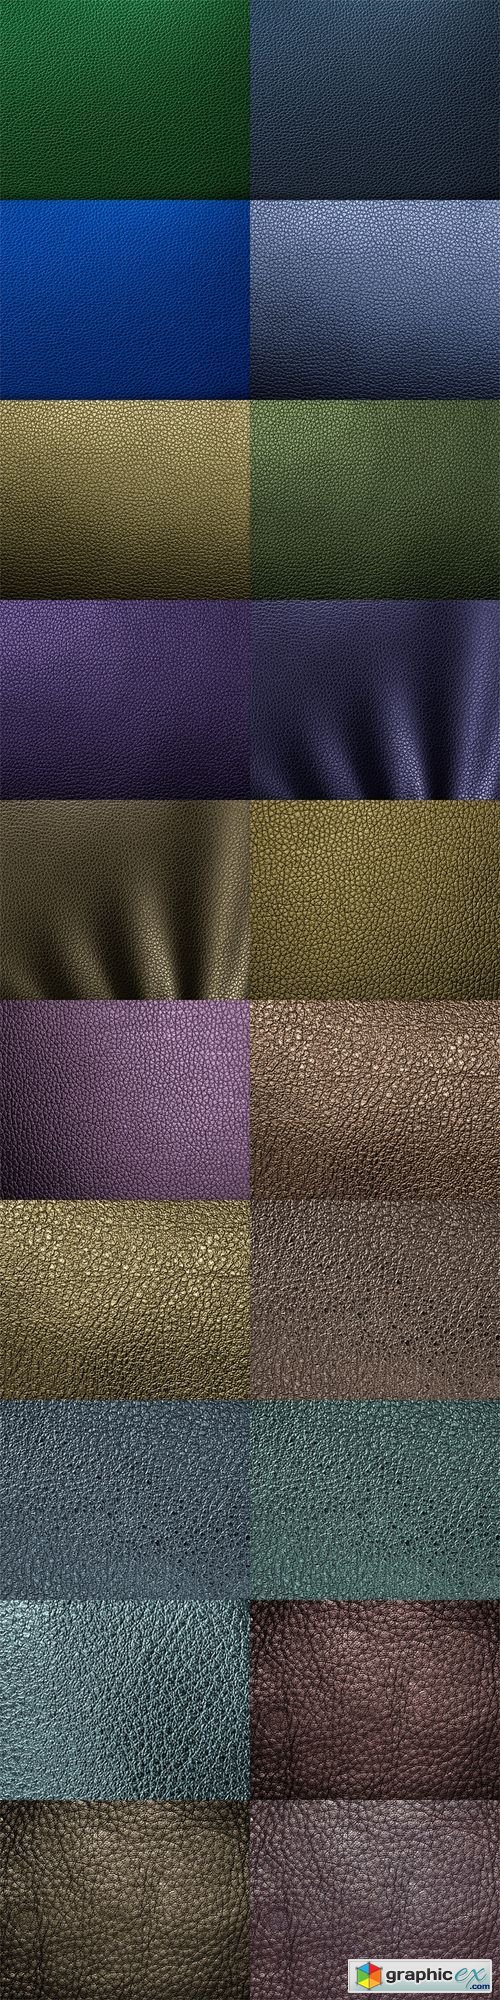 Leather texture or leather background for design with copy space for text or image